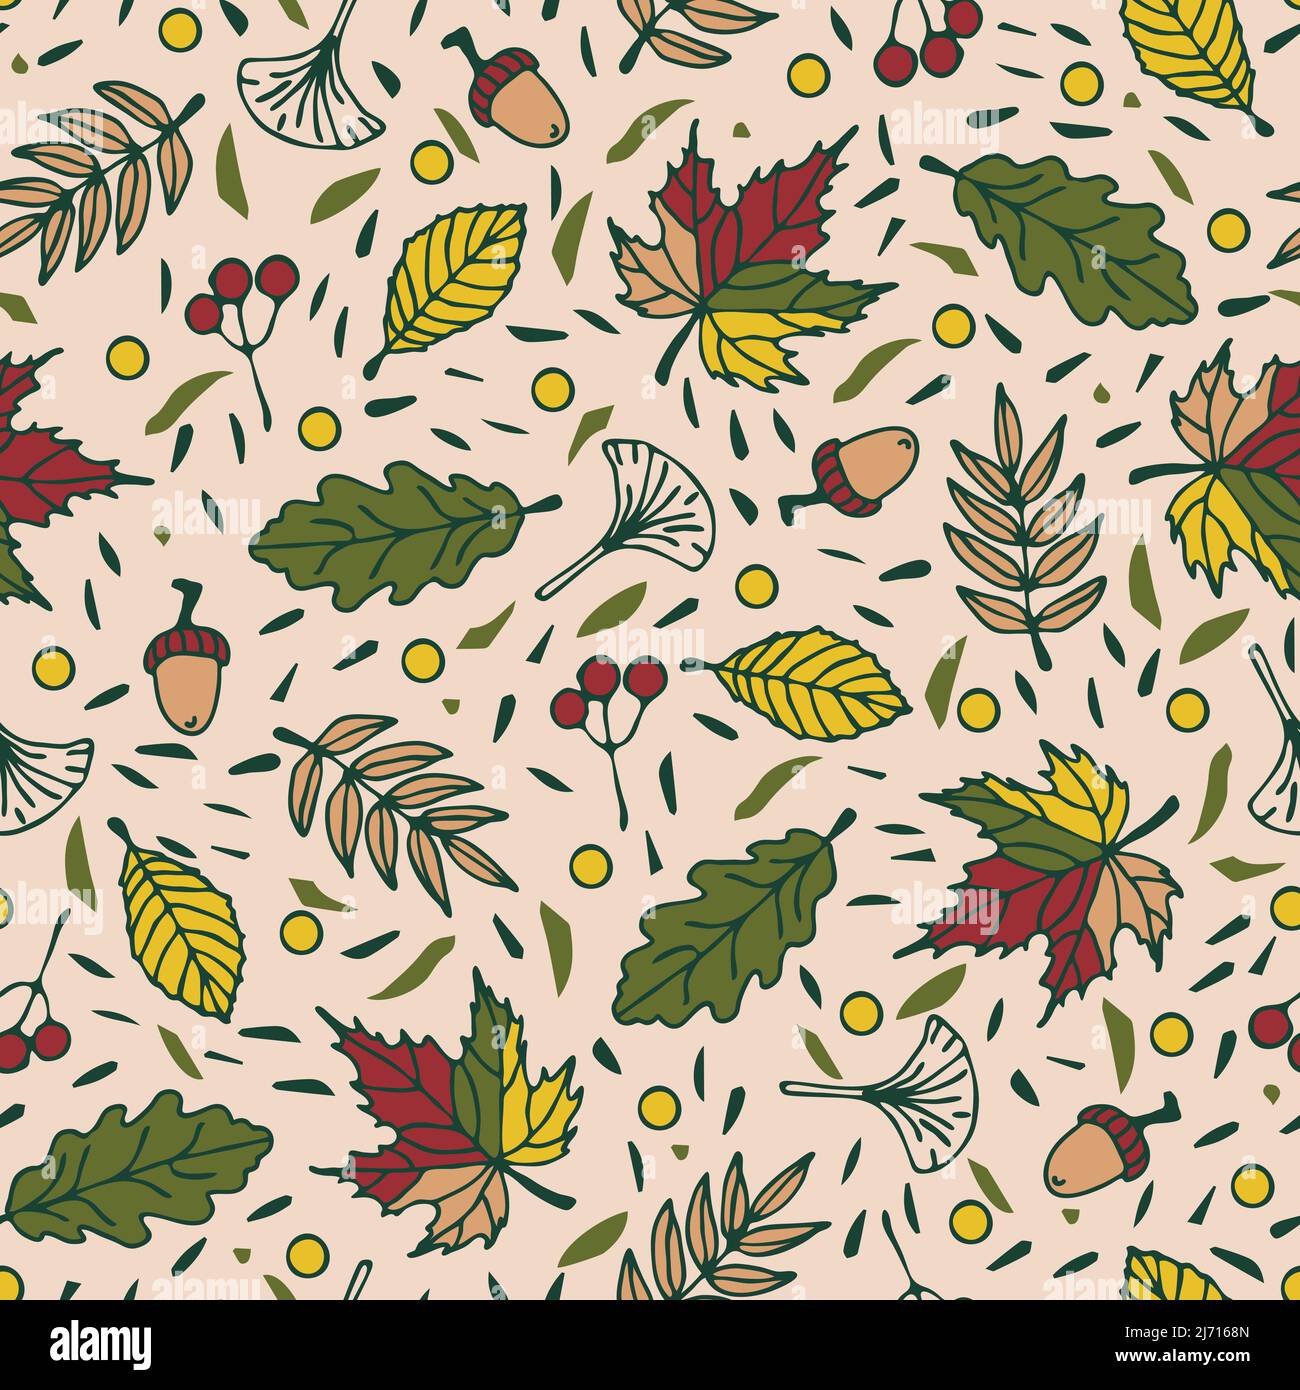 Seamless vector pattern with autumn leaves on beige background. Beautiful fall season wallpaper design. Decorative forest fashion textile texture. Stock Vector